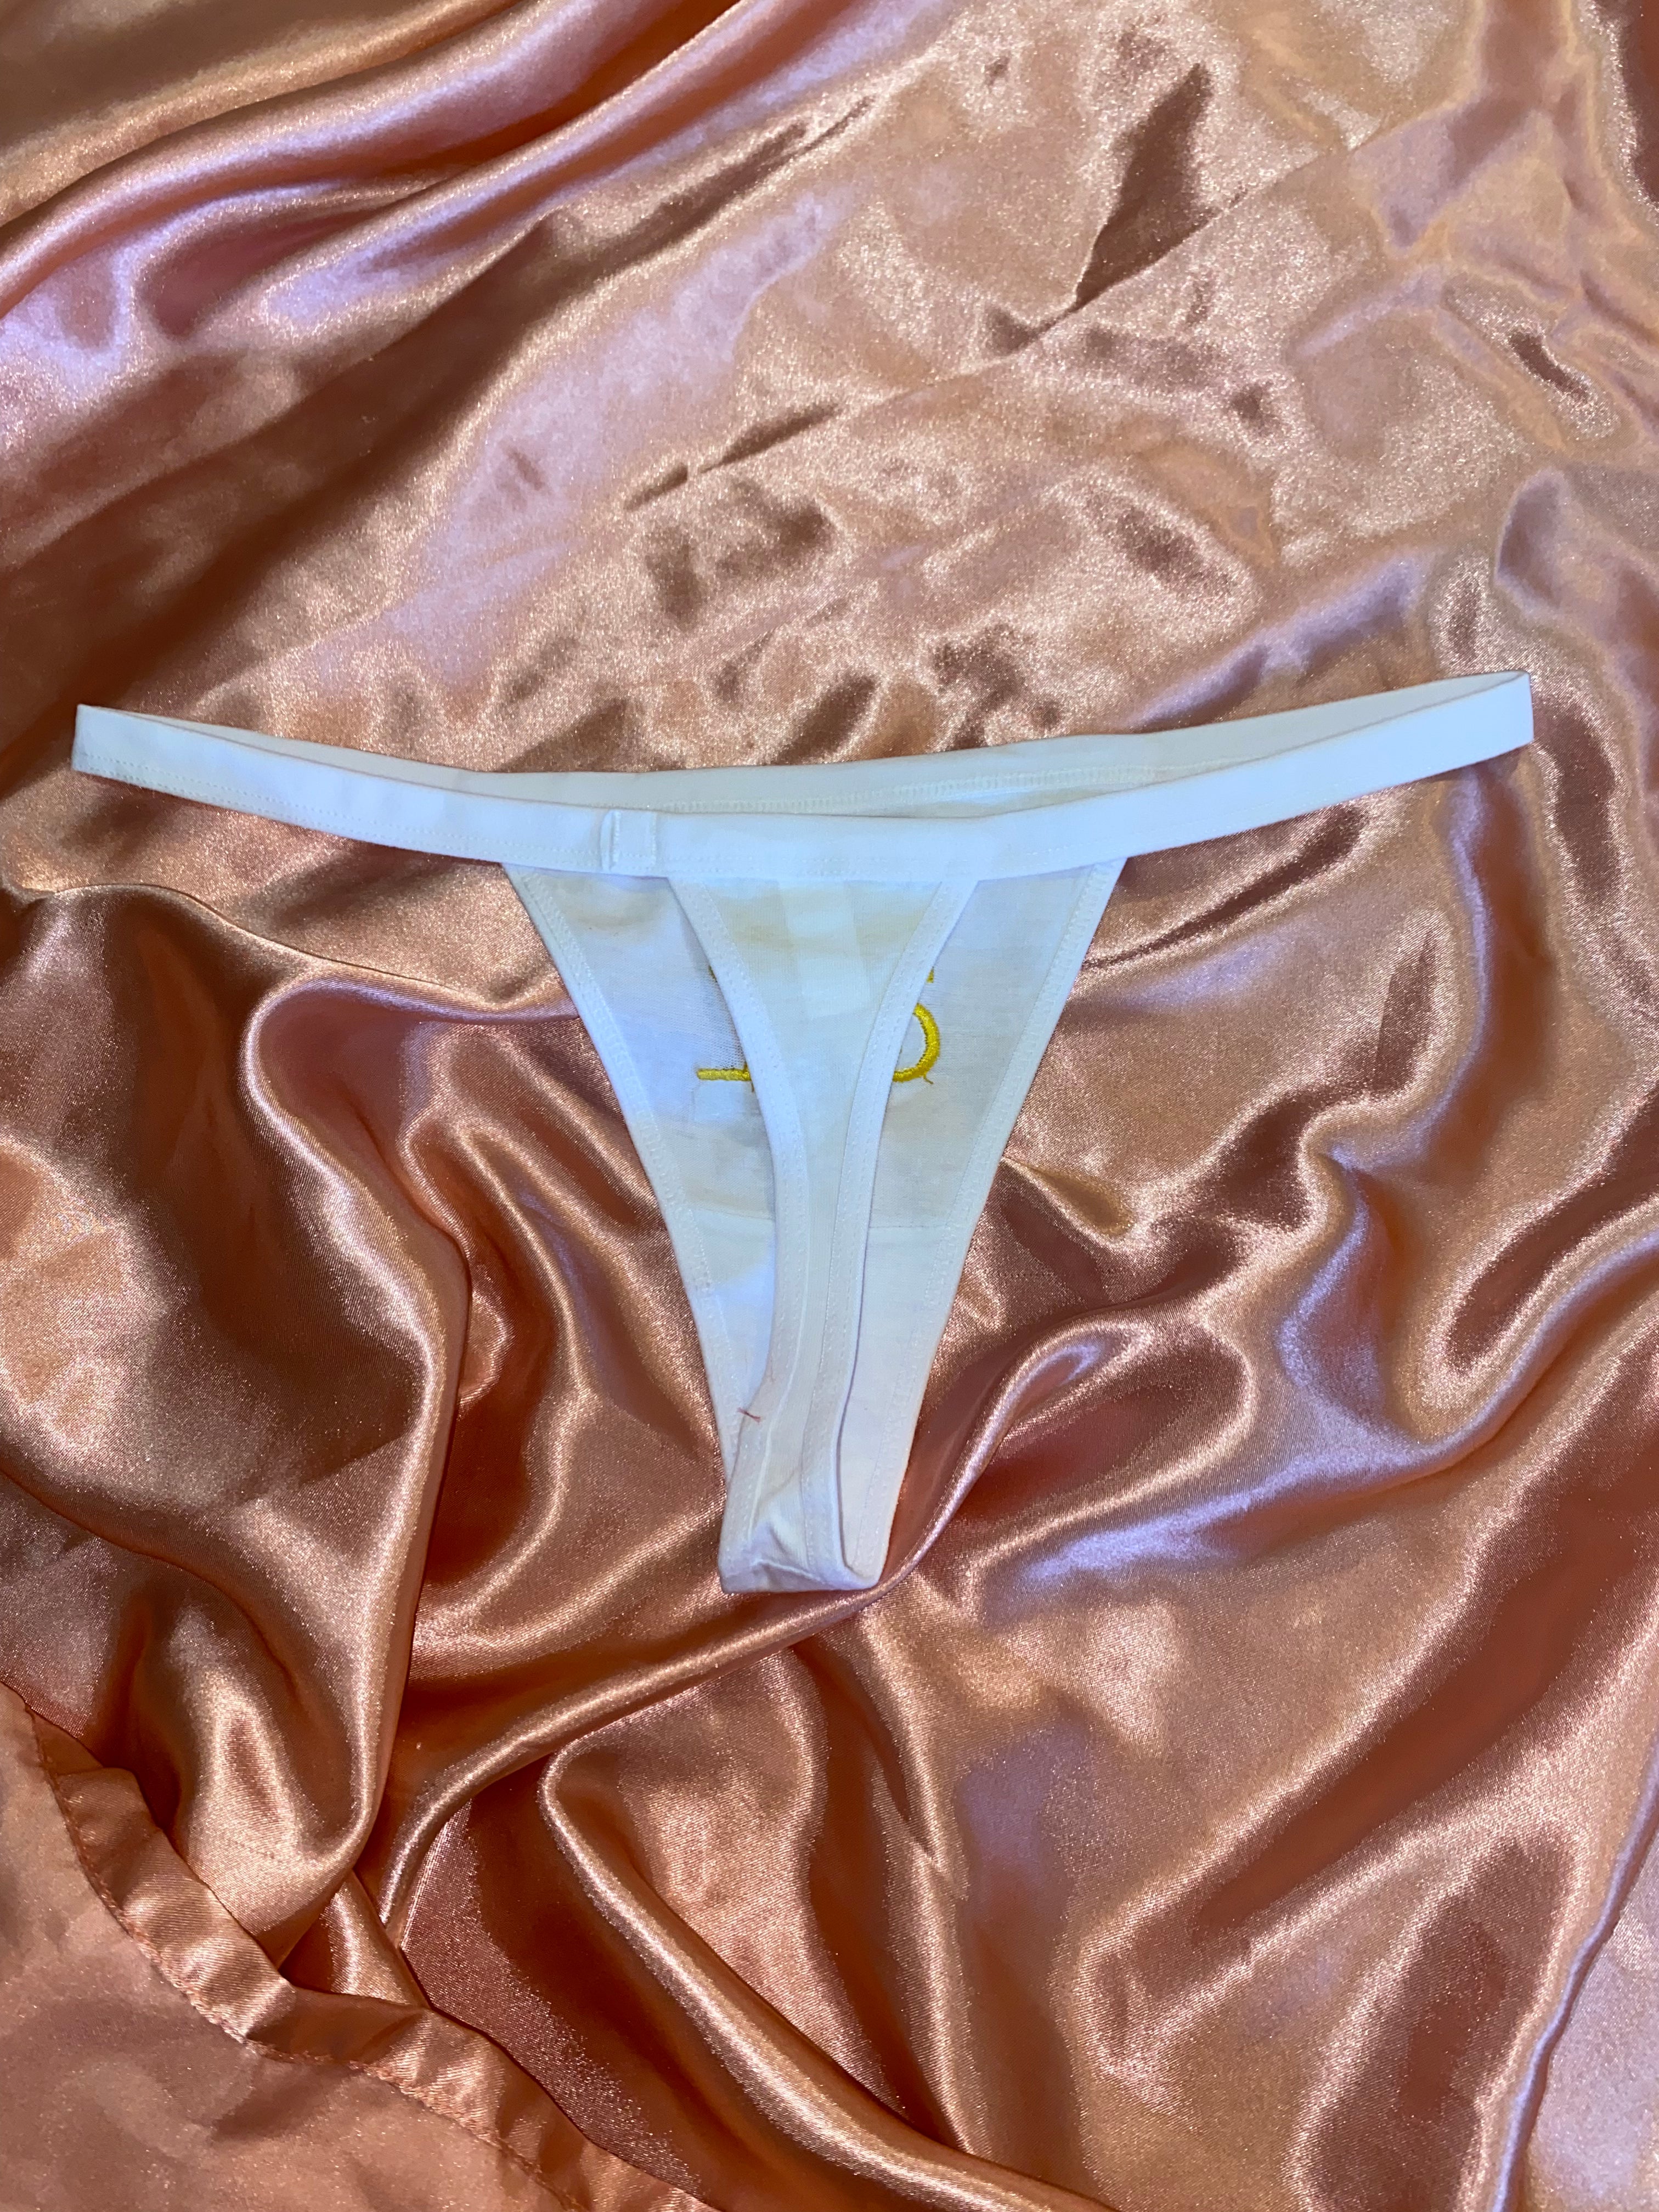 bill muszynski recommends girl pees in thong pic